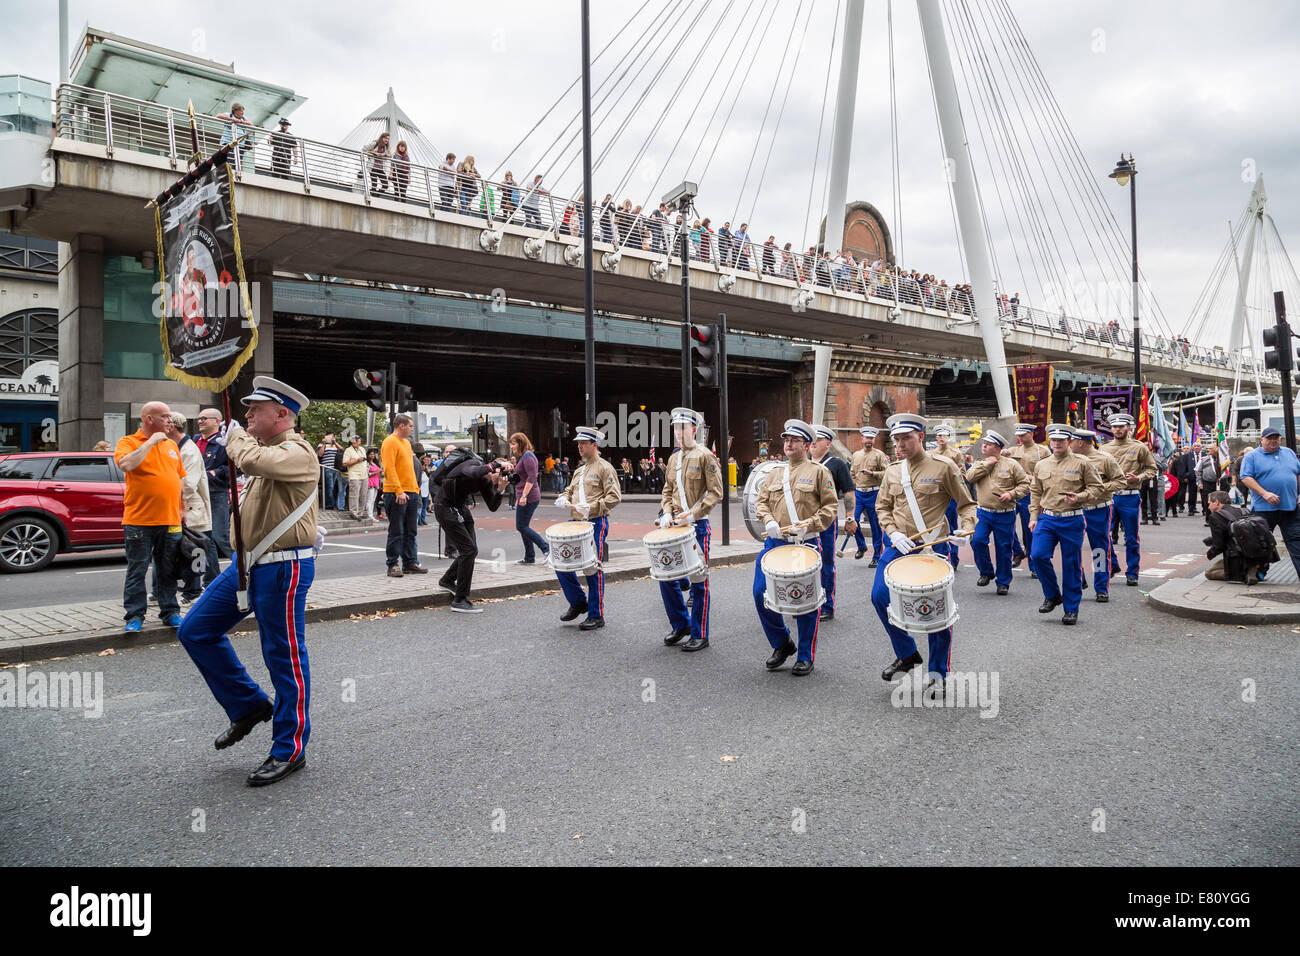 London, UK. 27th Sept, 2014.  Lord Carson memorial parade march through central London 2014 Credit:  Guy Corbishley/Alamy Live News Stock Photo